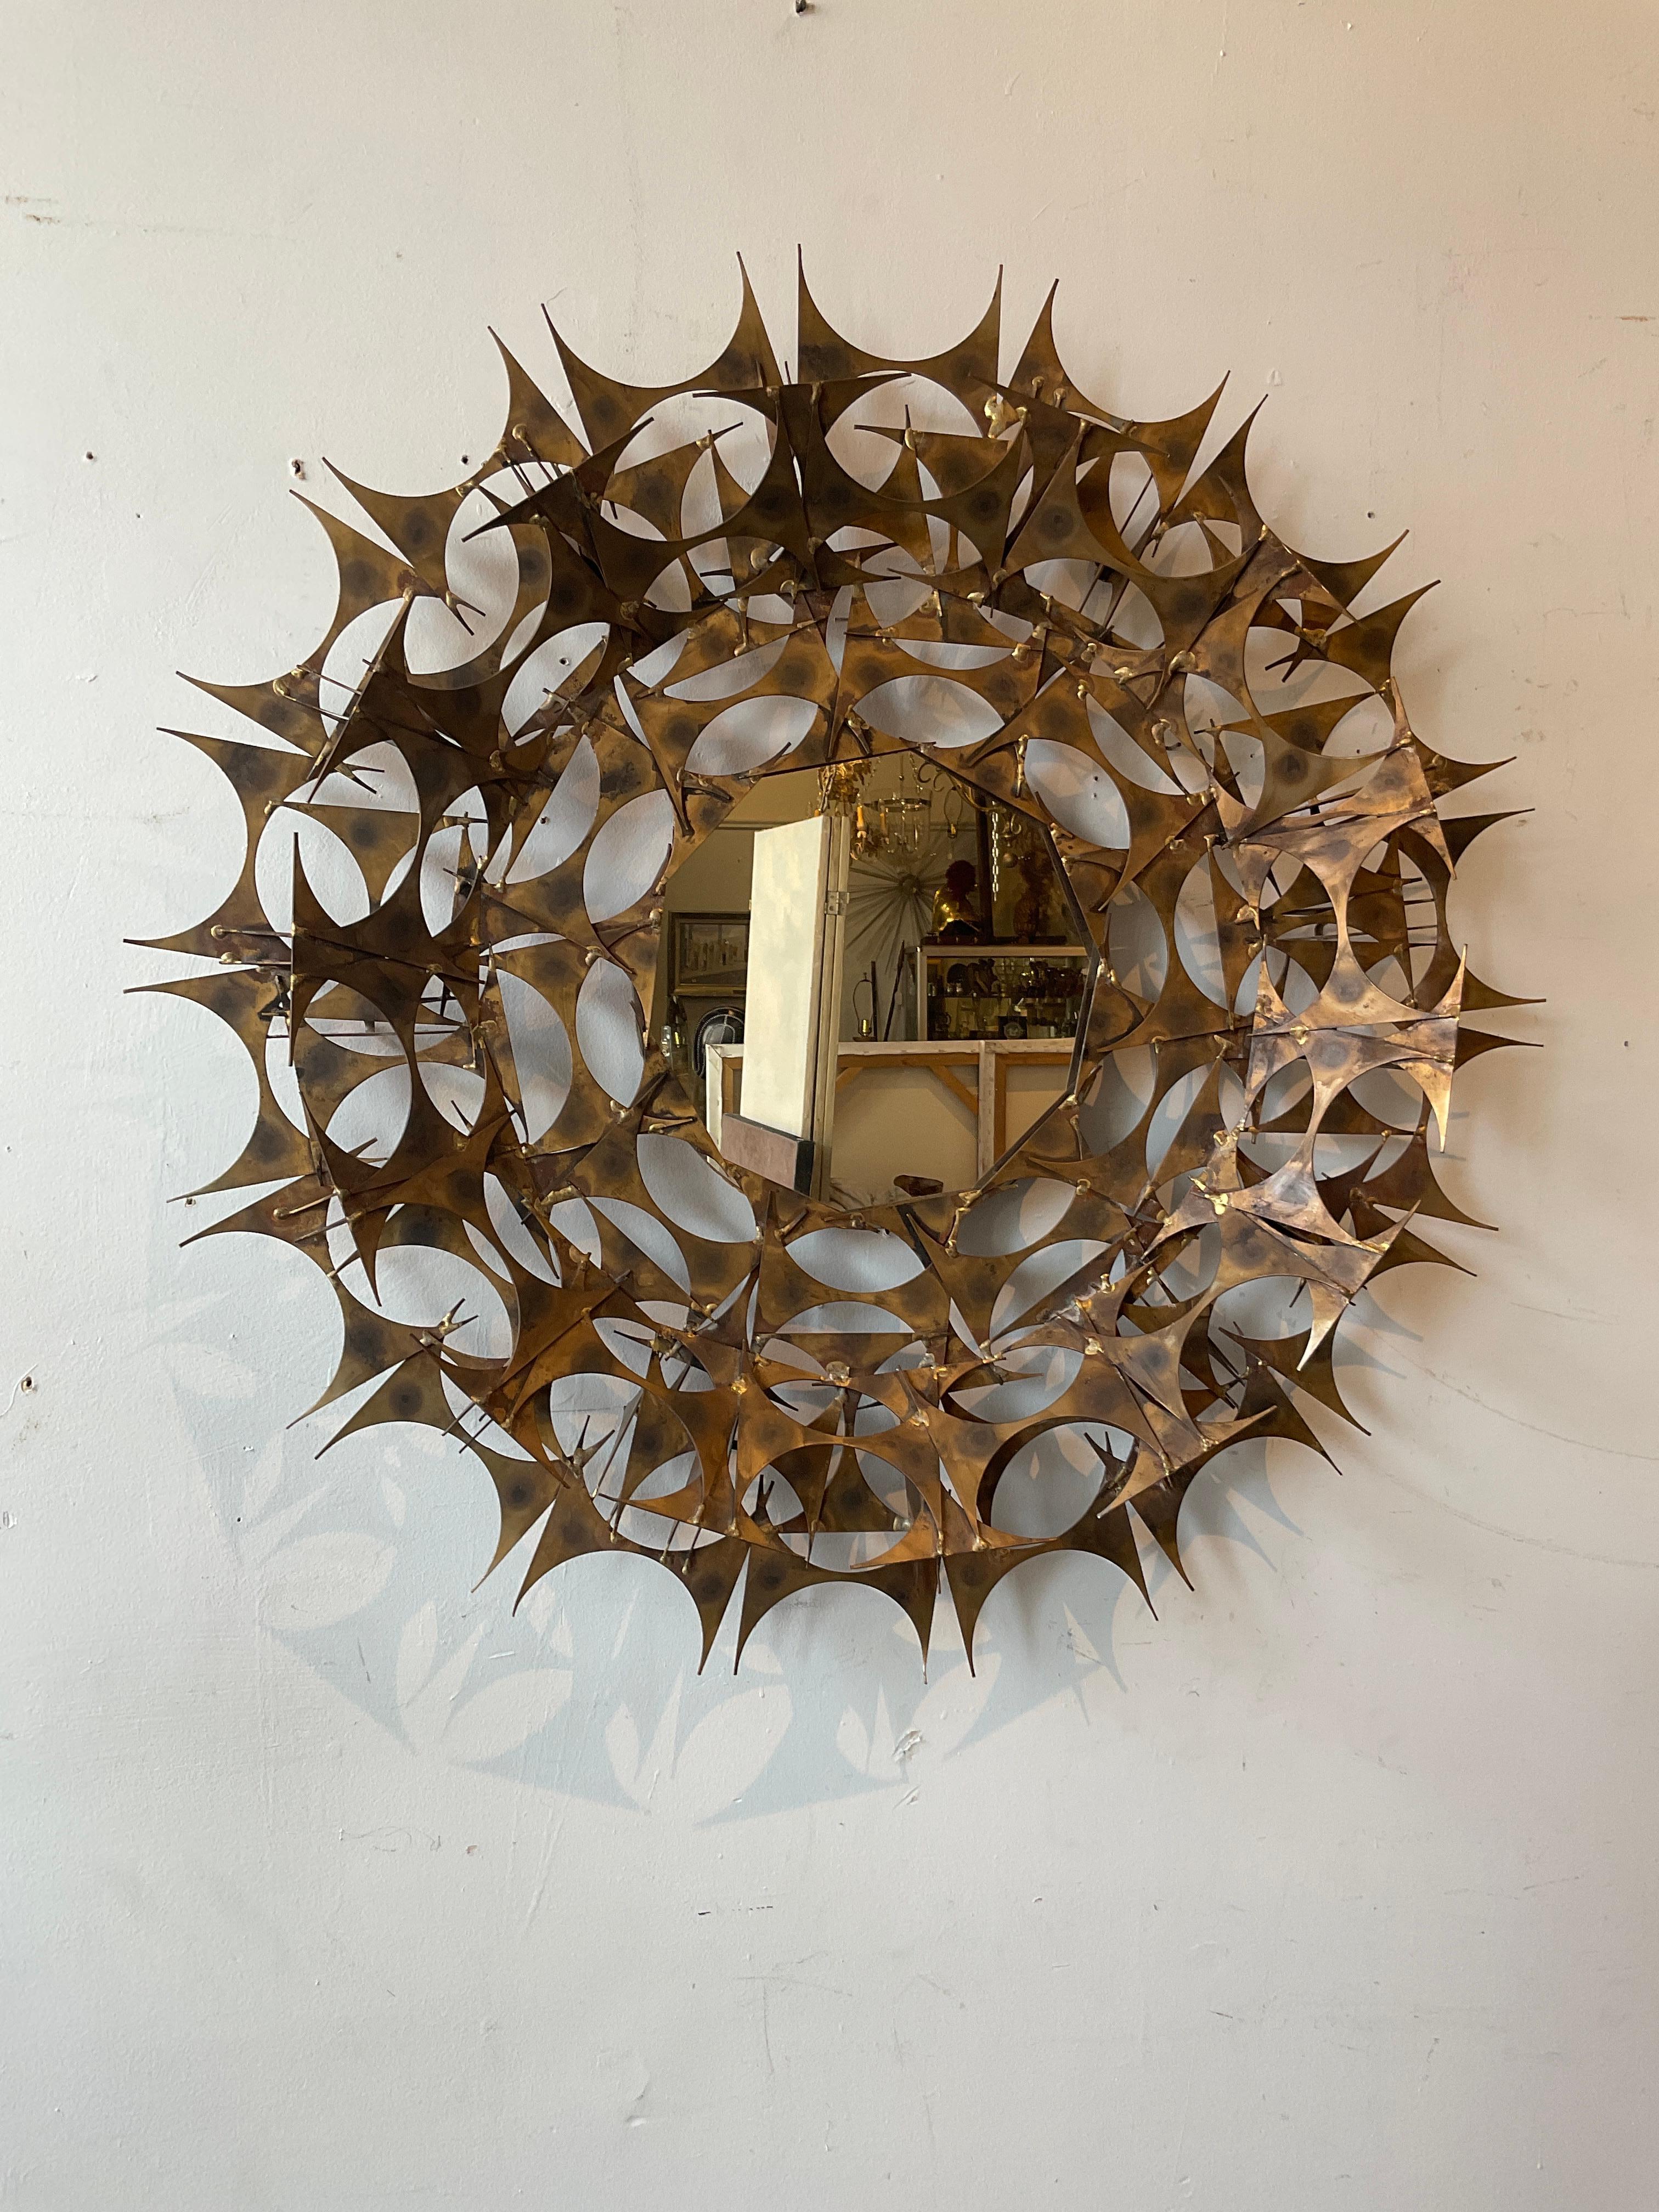 1970s Marc Weinstein brutalist sunburst mirror made from sheet metal with a painted finish.